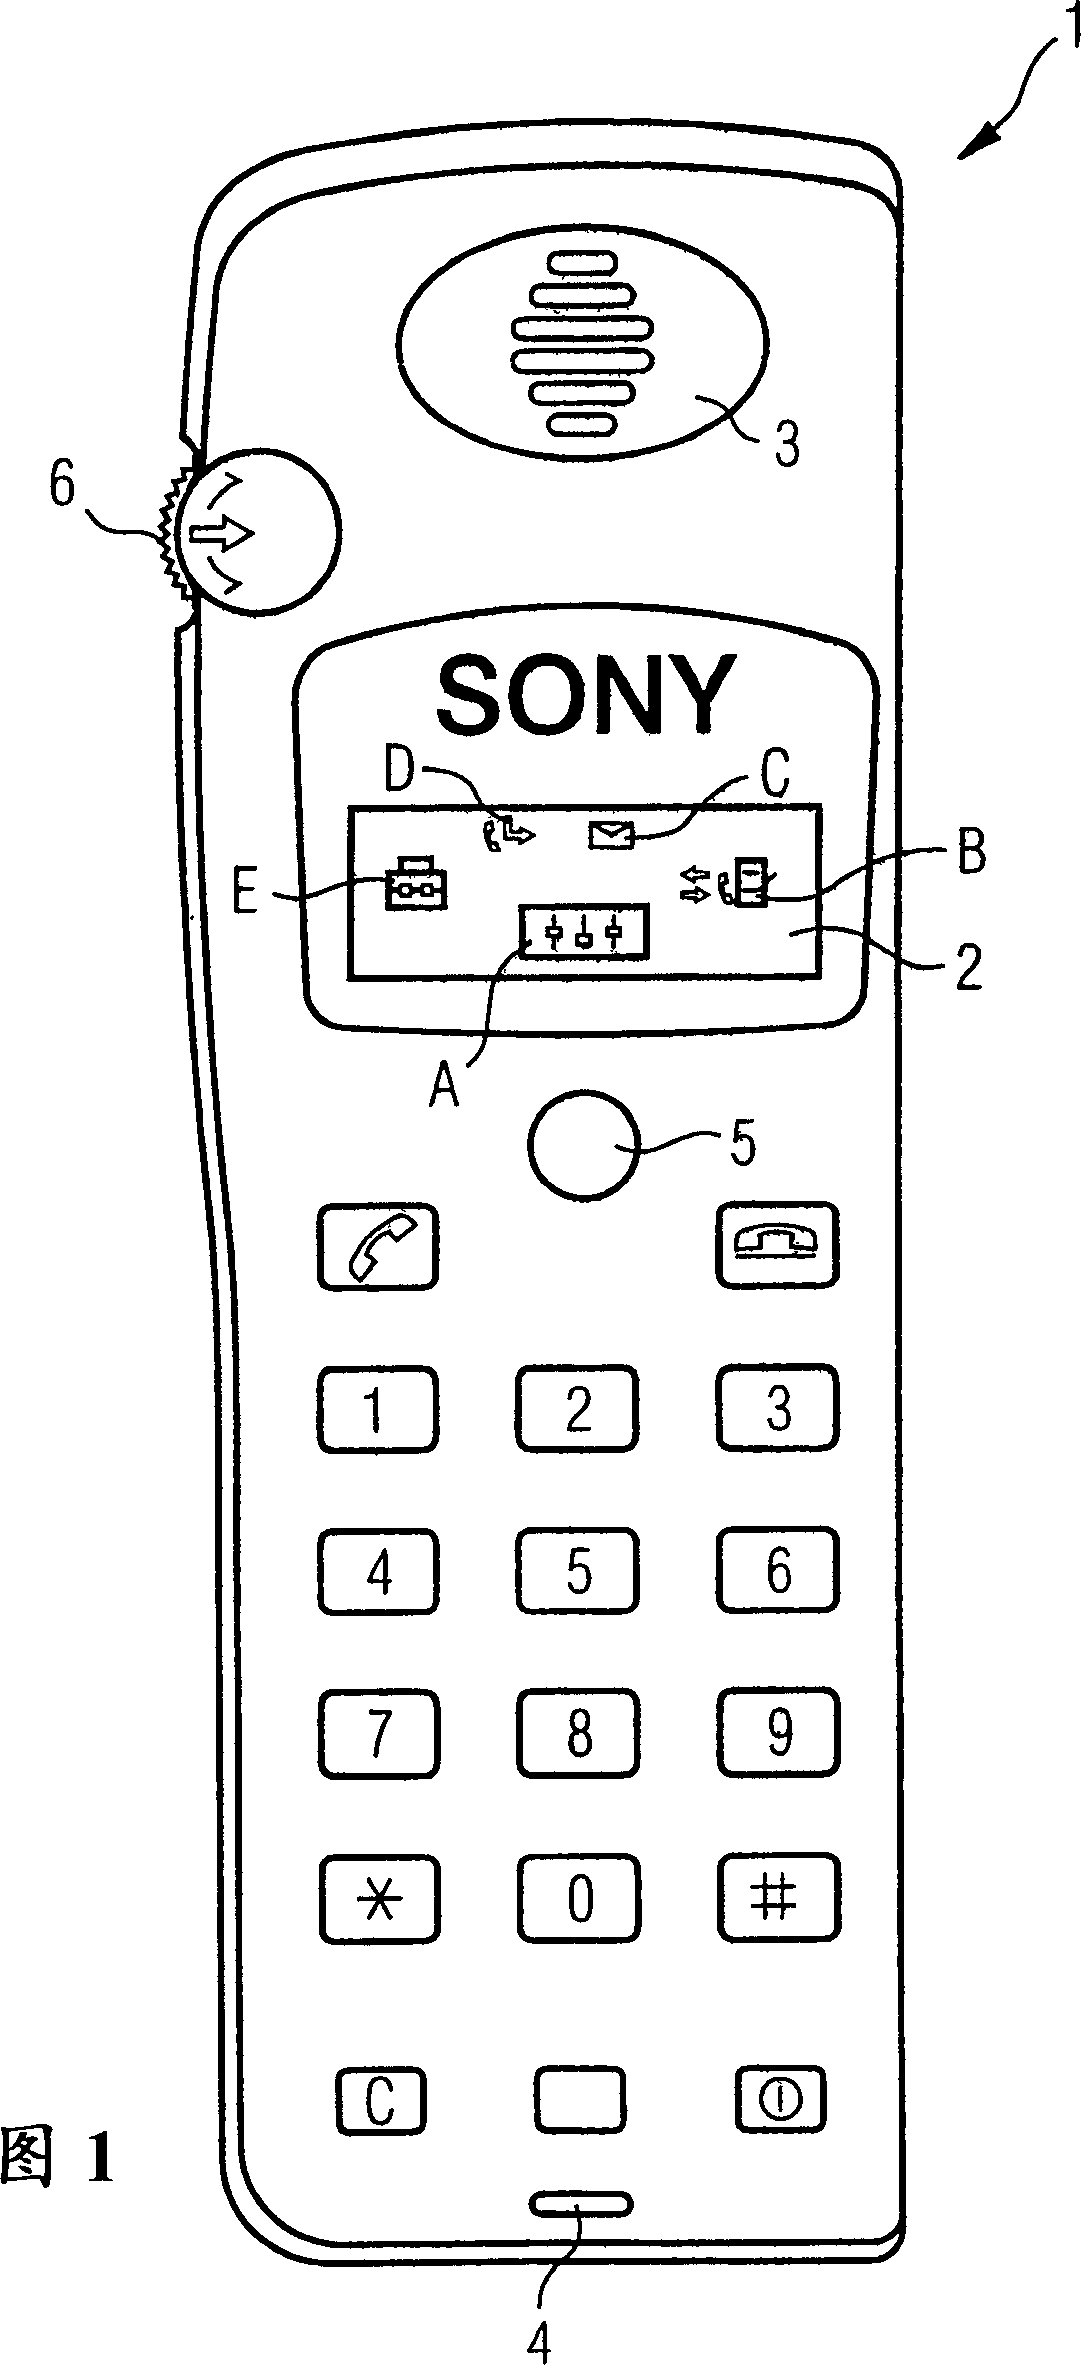 Wireless communication terminal and method for displaying icon on its display device